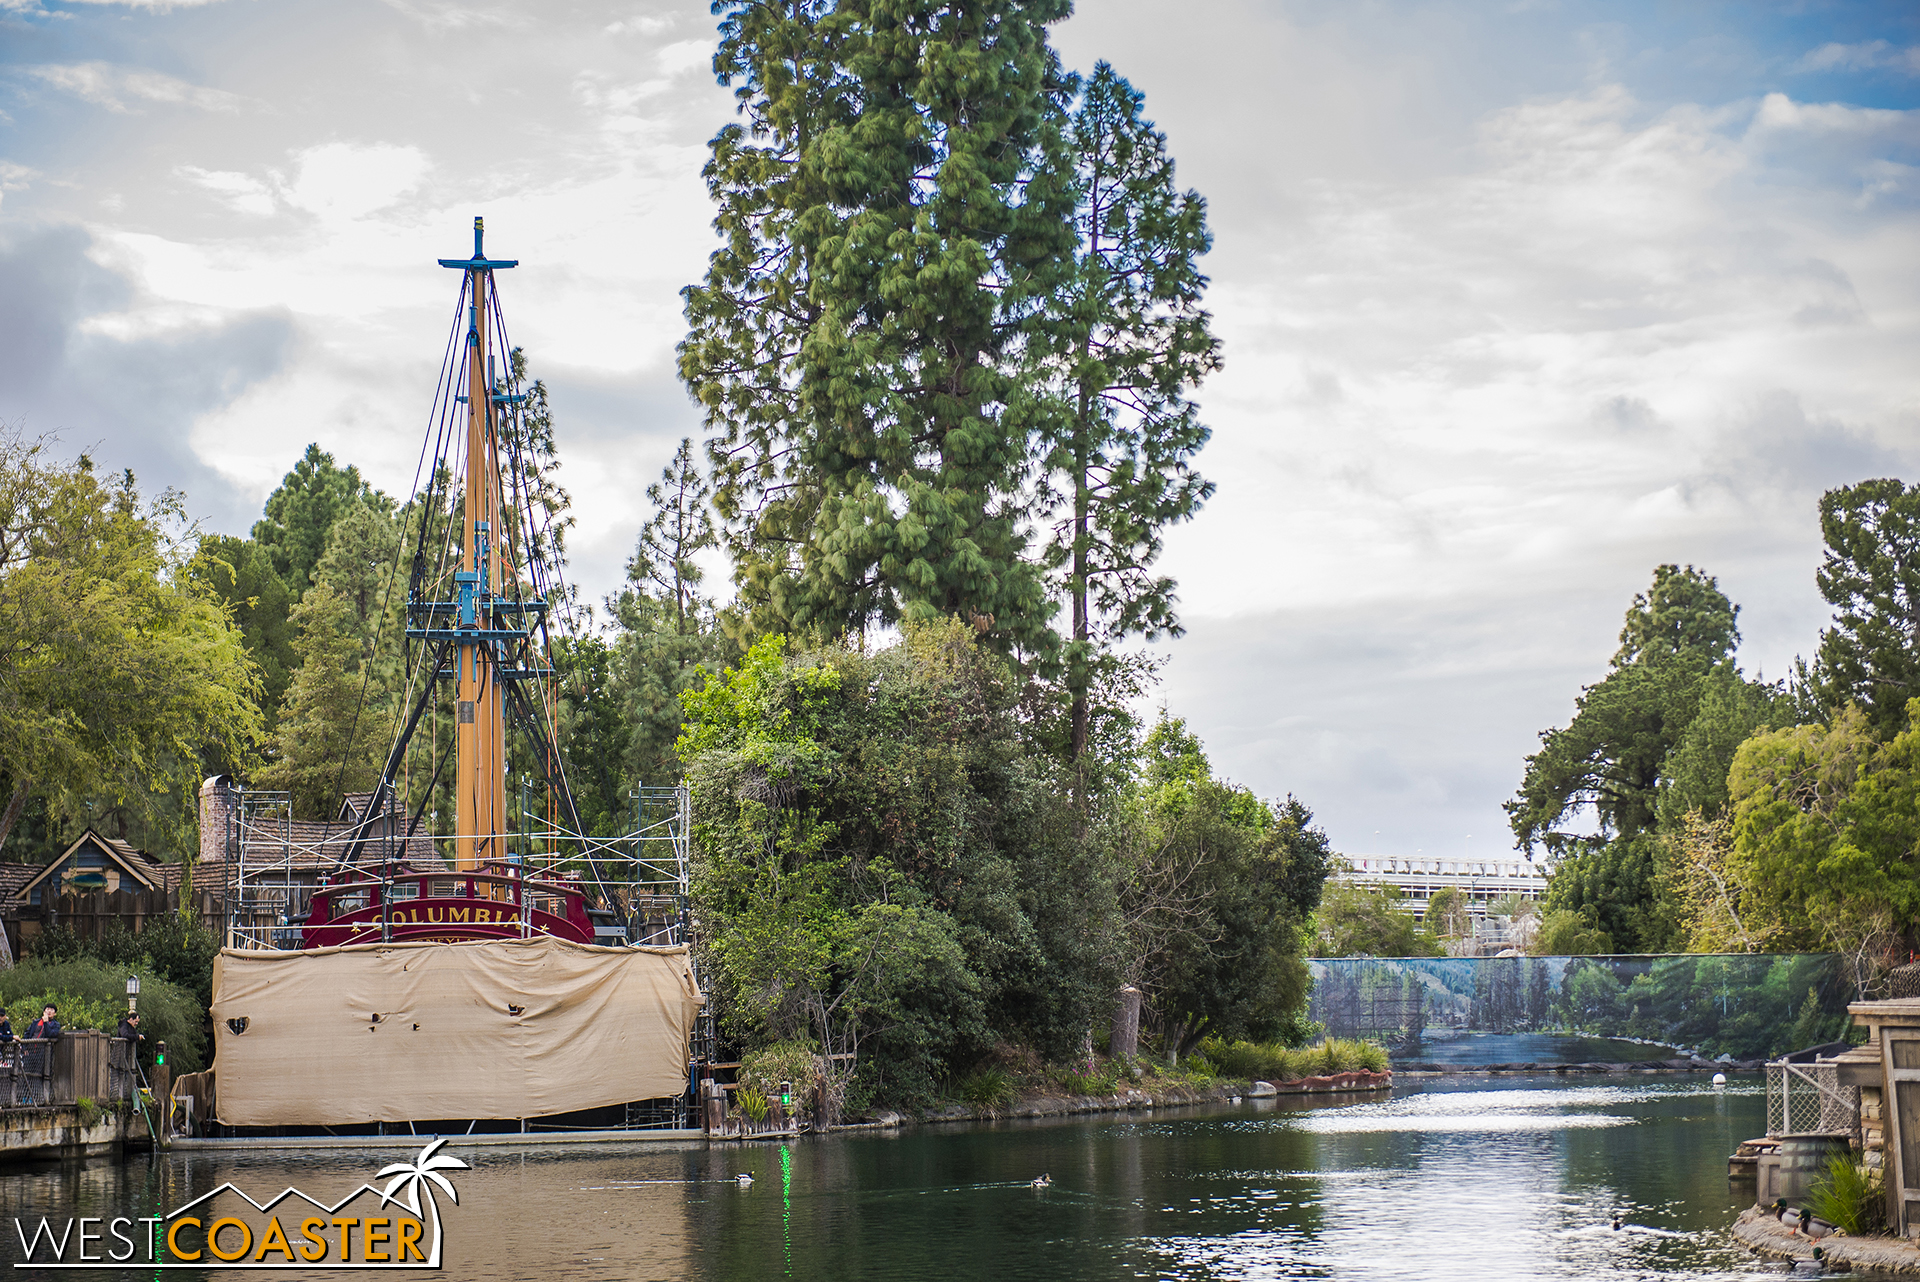  The Columbia and one of the dams of the Rivers of America. 